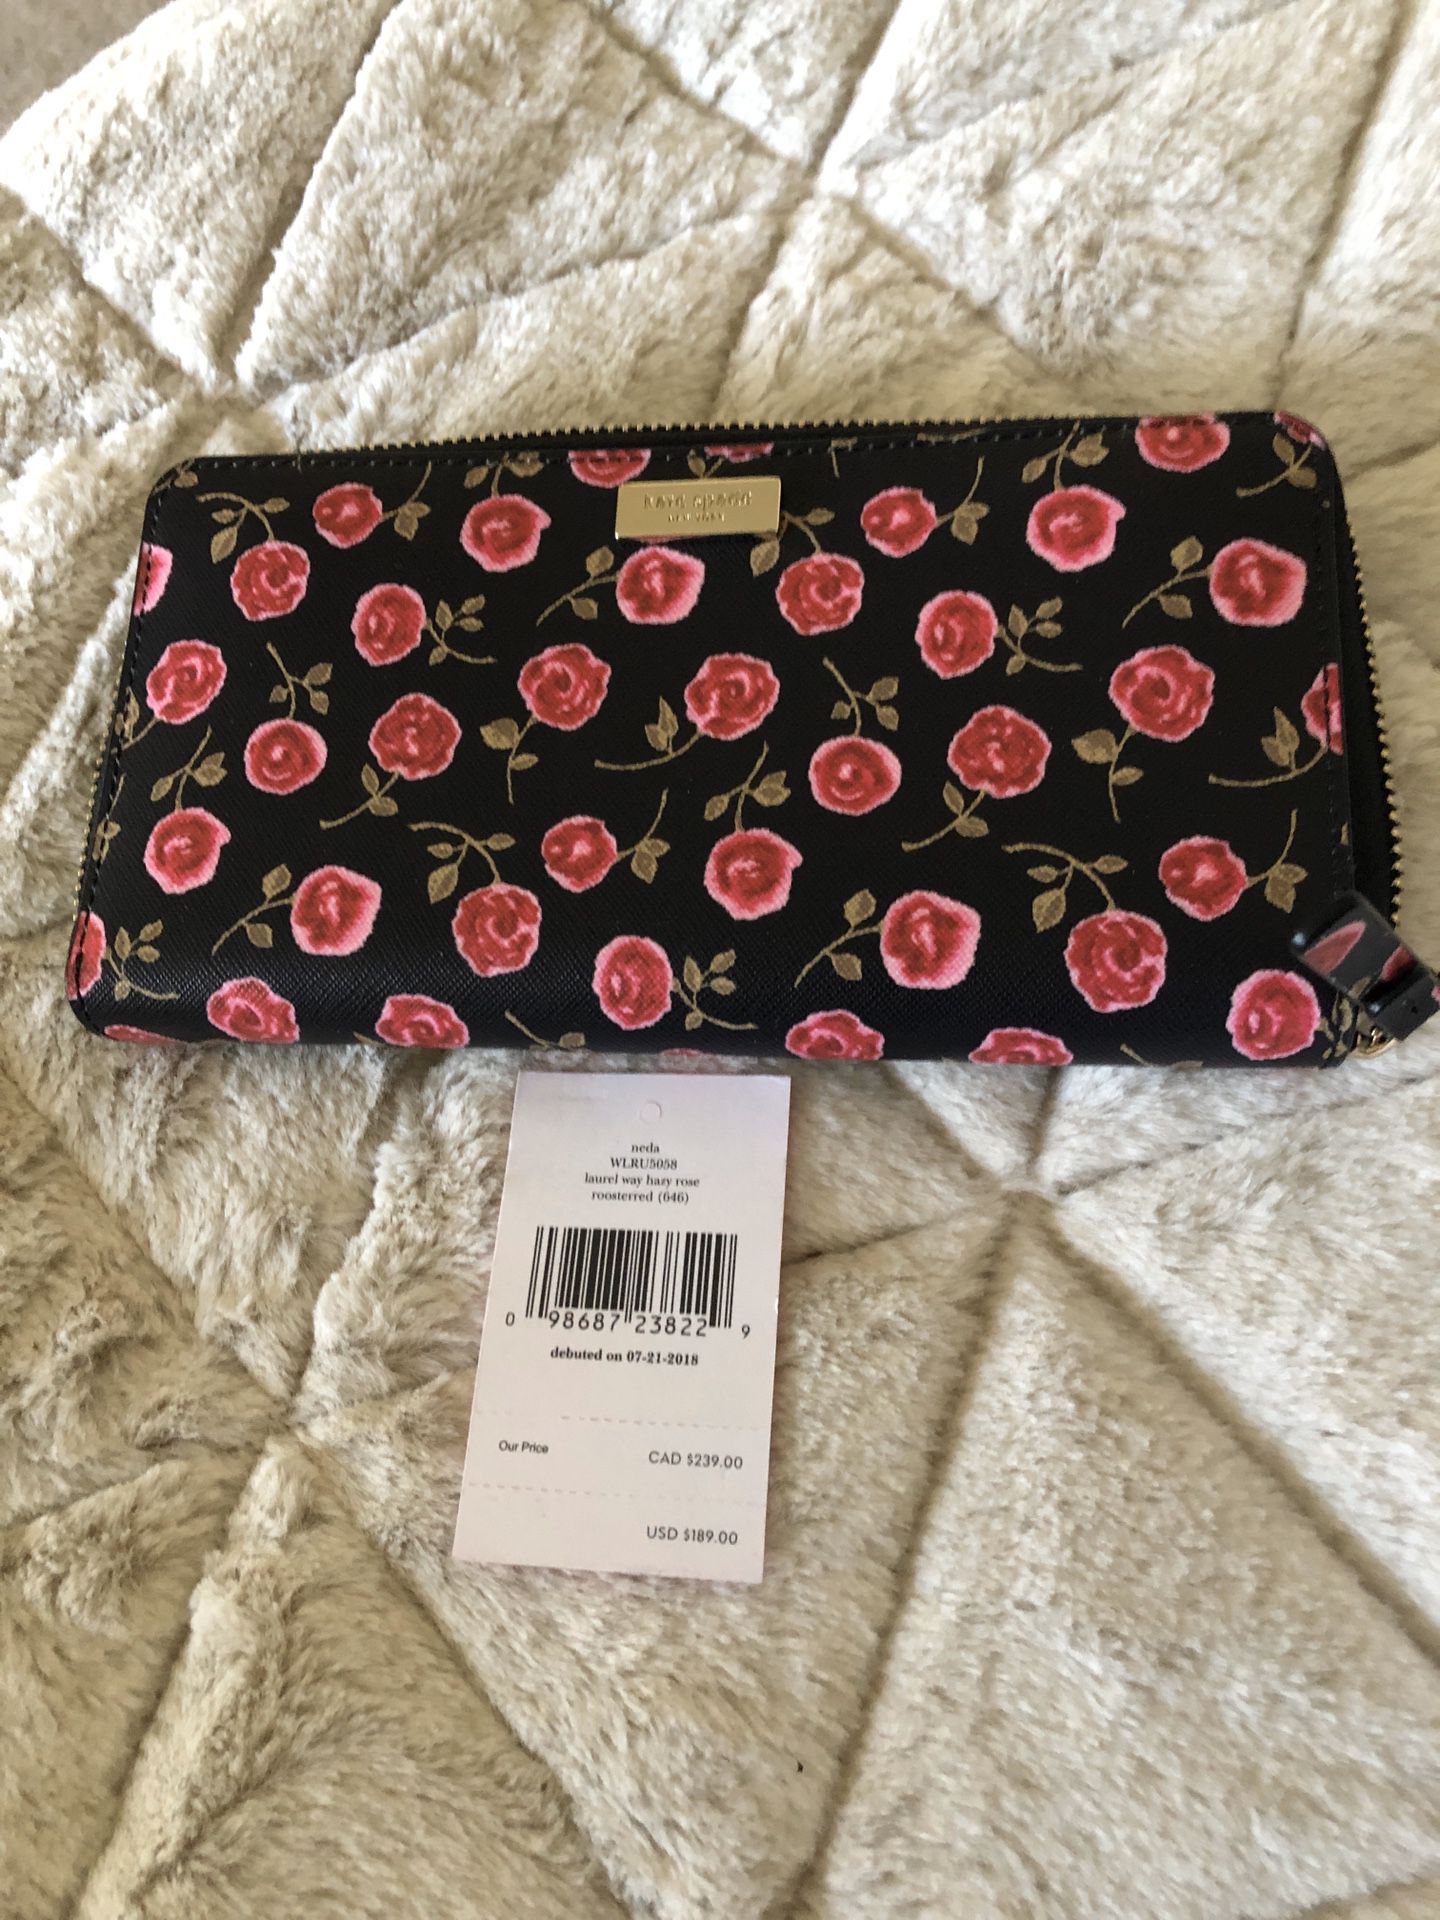 KATE SPADE ♠️ BRAND NEW AUTHENTIC WALLET